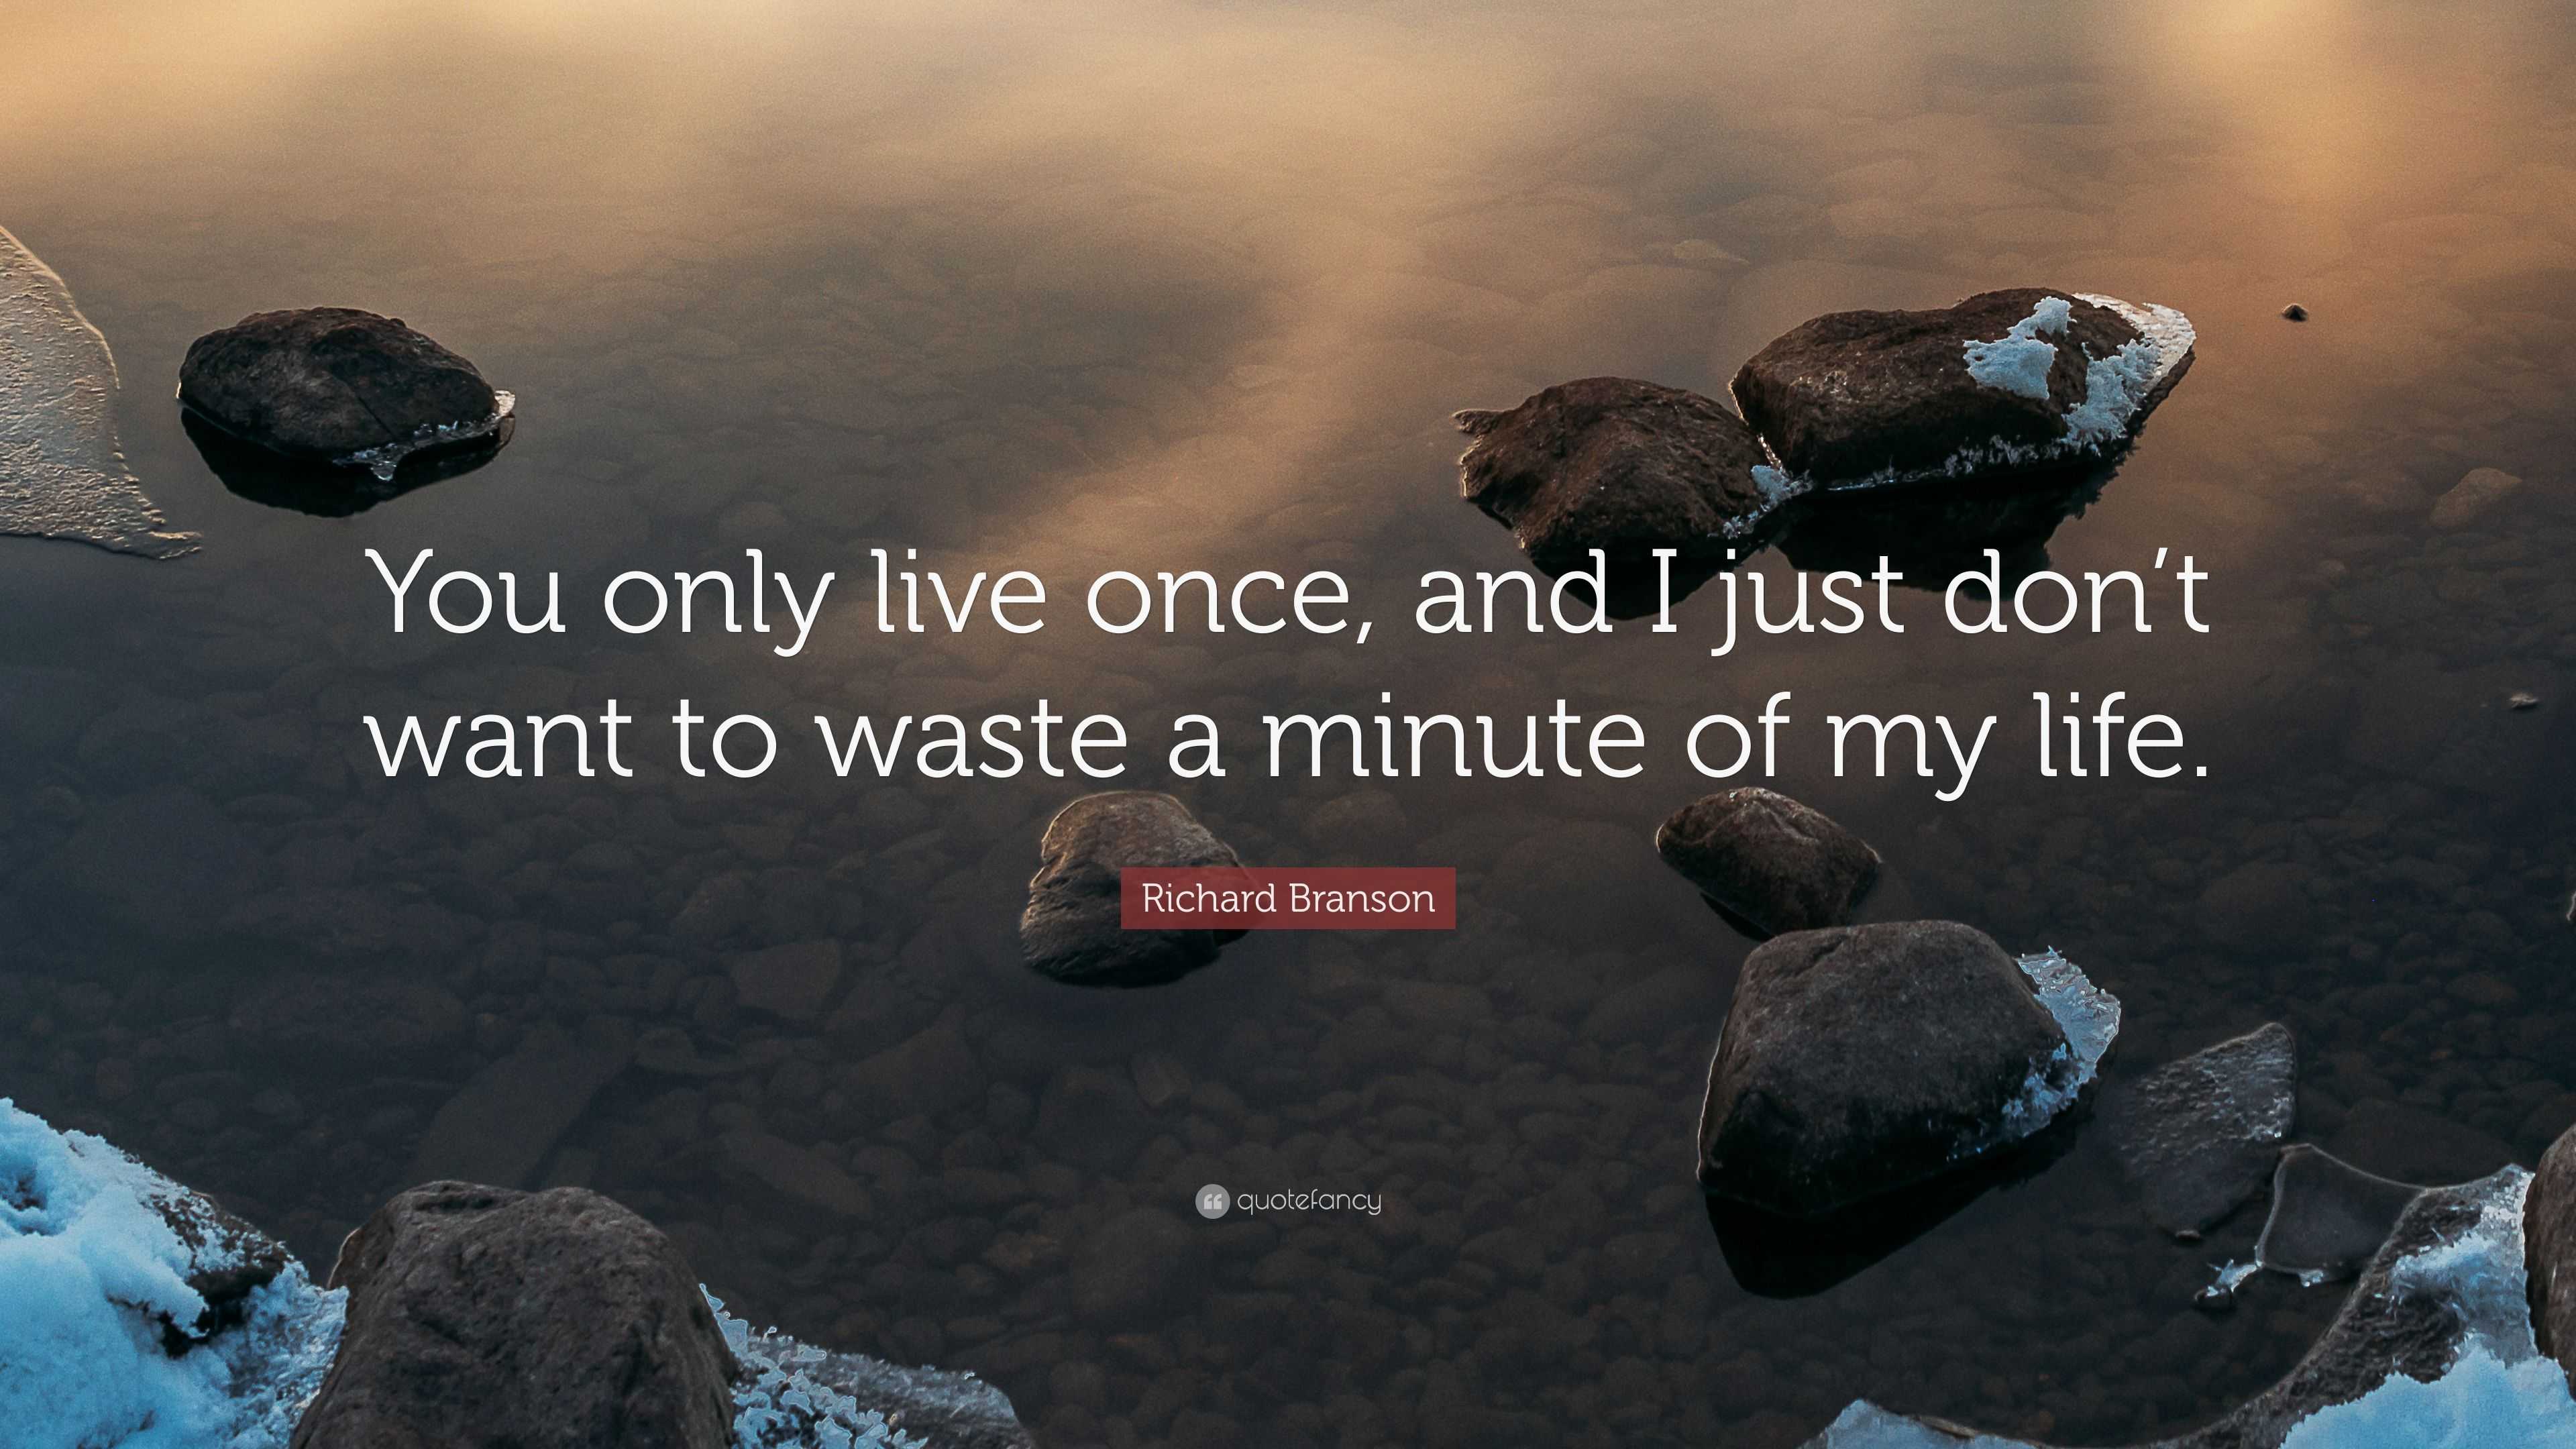 Richard Branson Quote “You only live once and I just don t